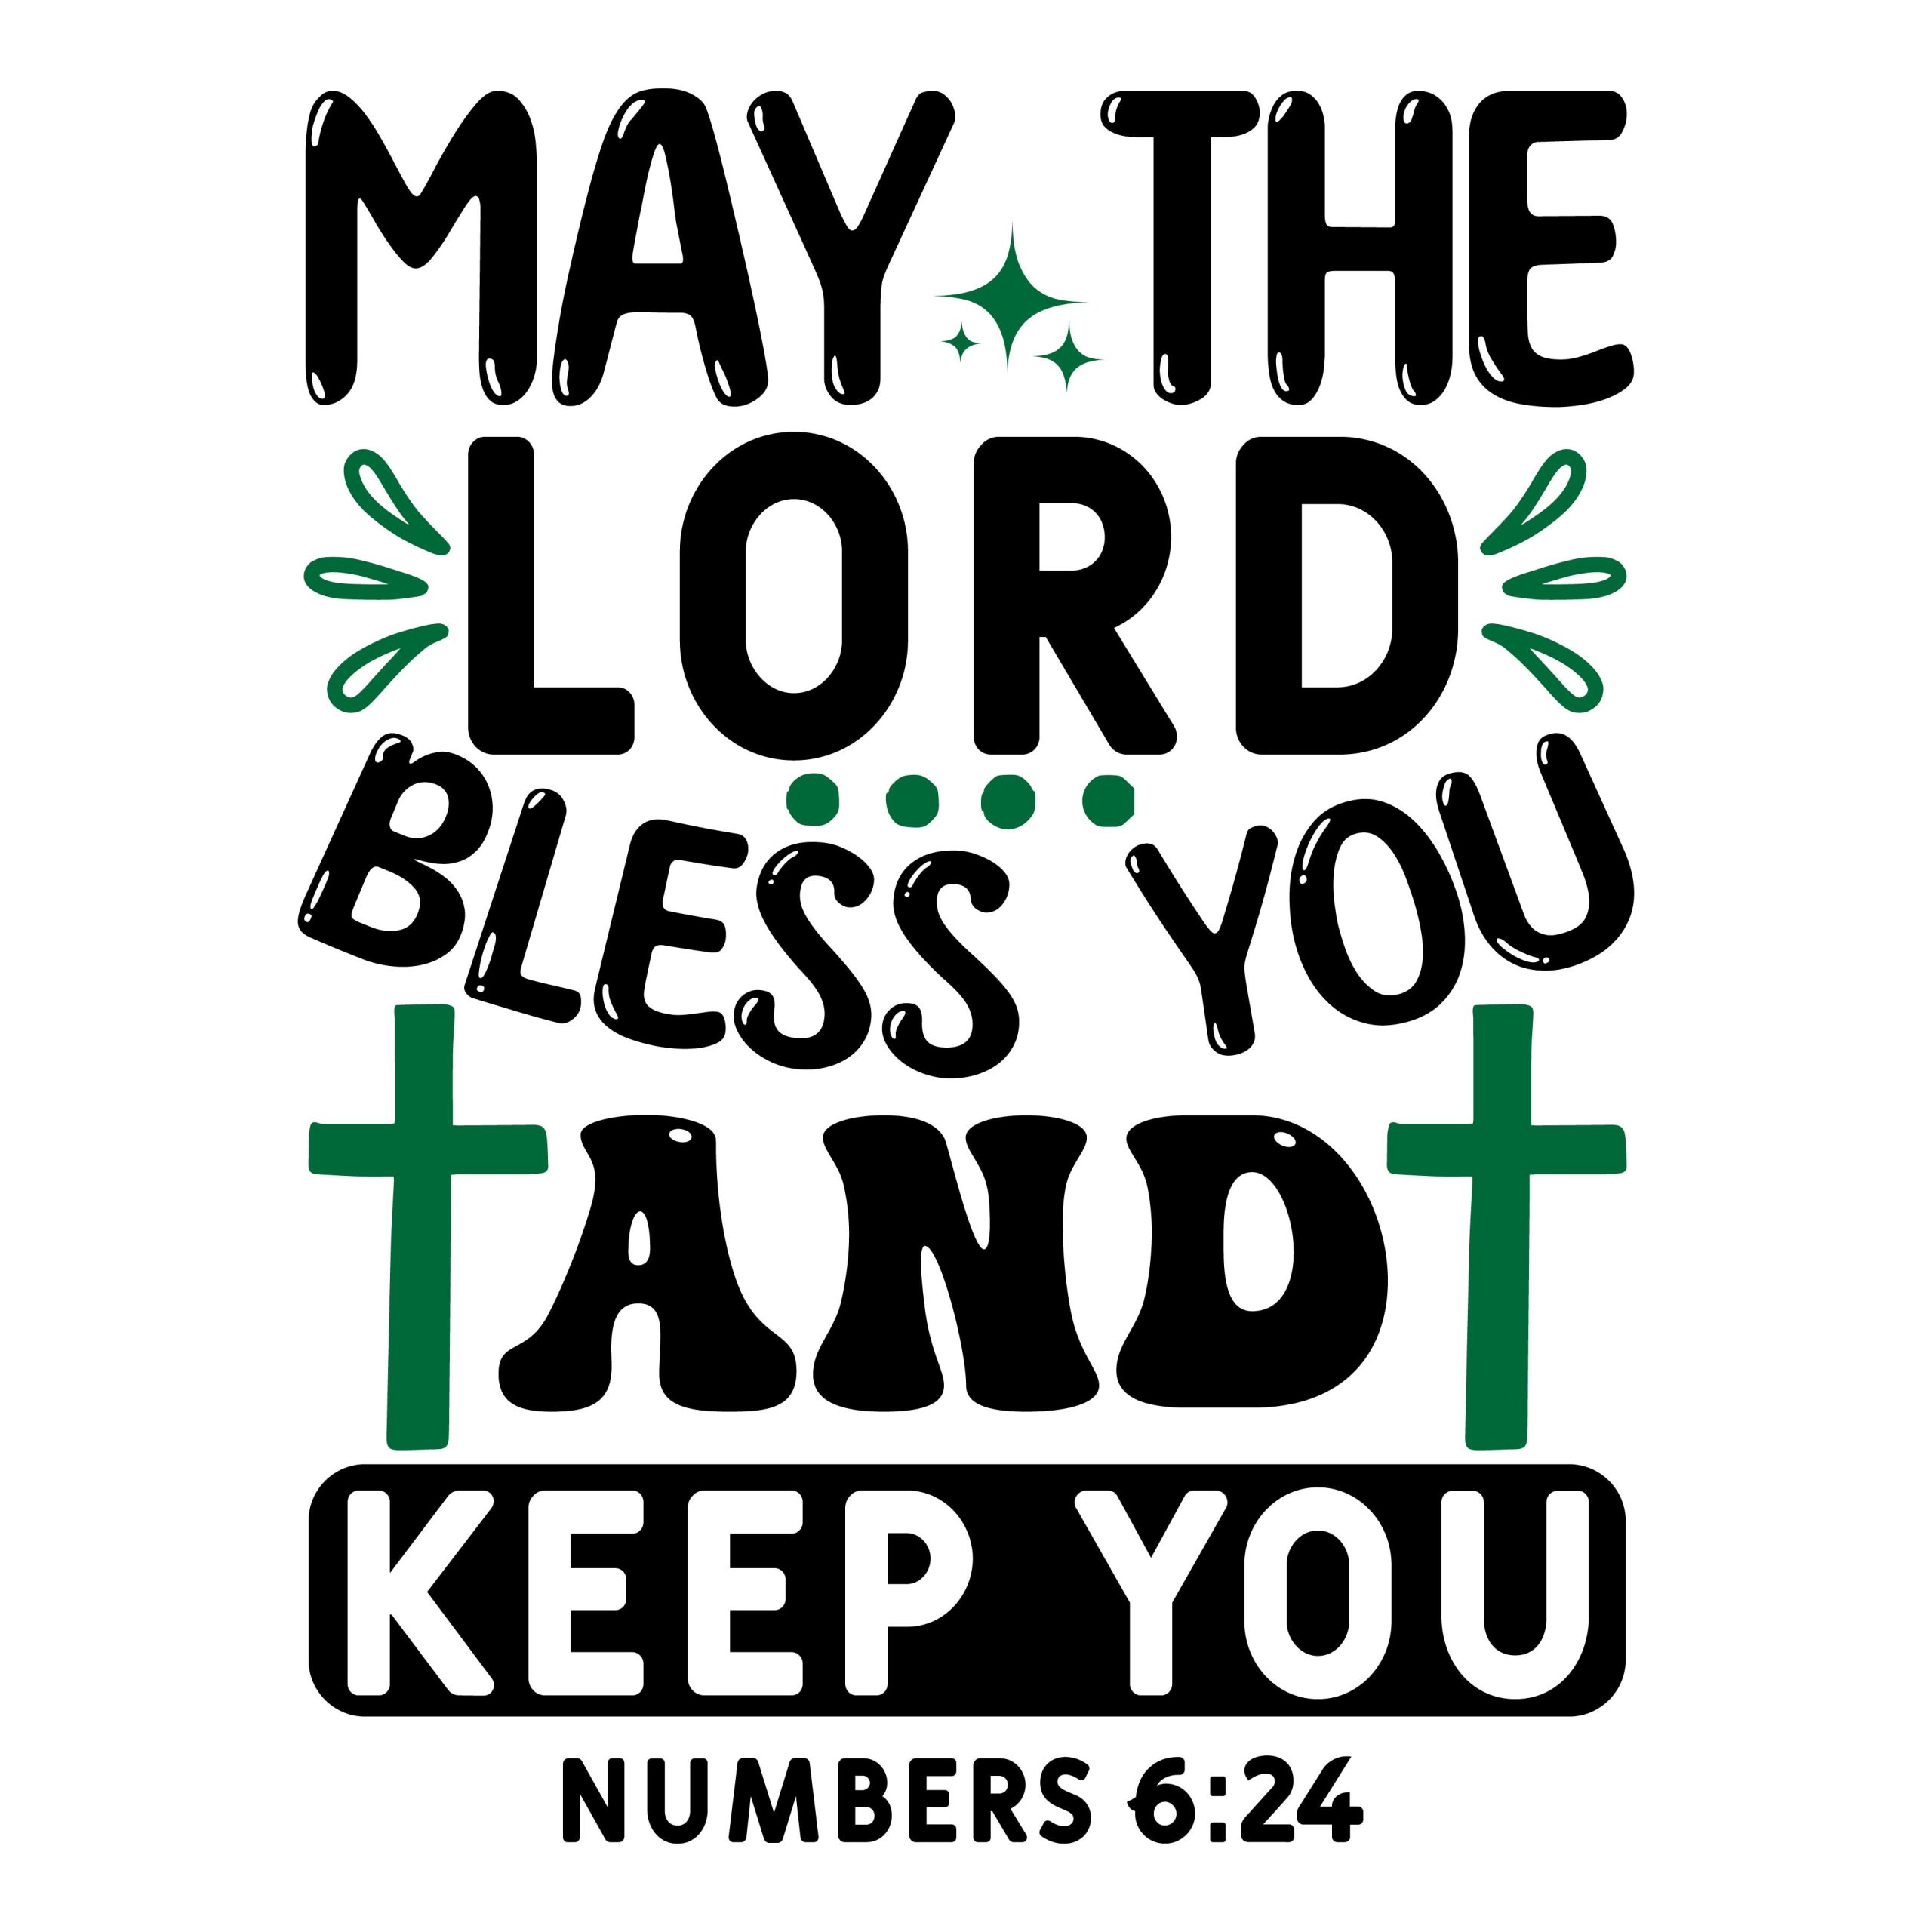 May the lord bless you and keep you Numbers 6:24, bible verses, scripture verses, svg files, passages, sayings, cricut designs, silhouette, embroidery, bundle, free cut files, design space, vector